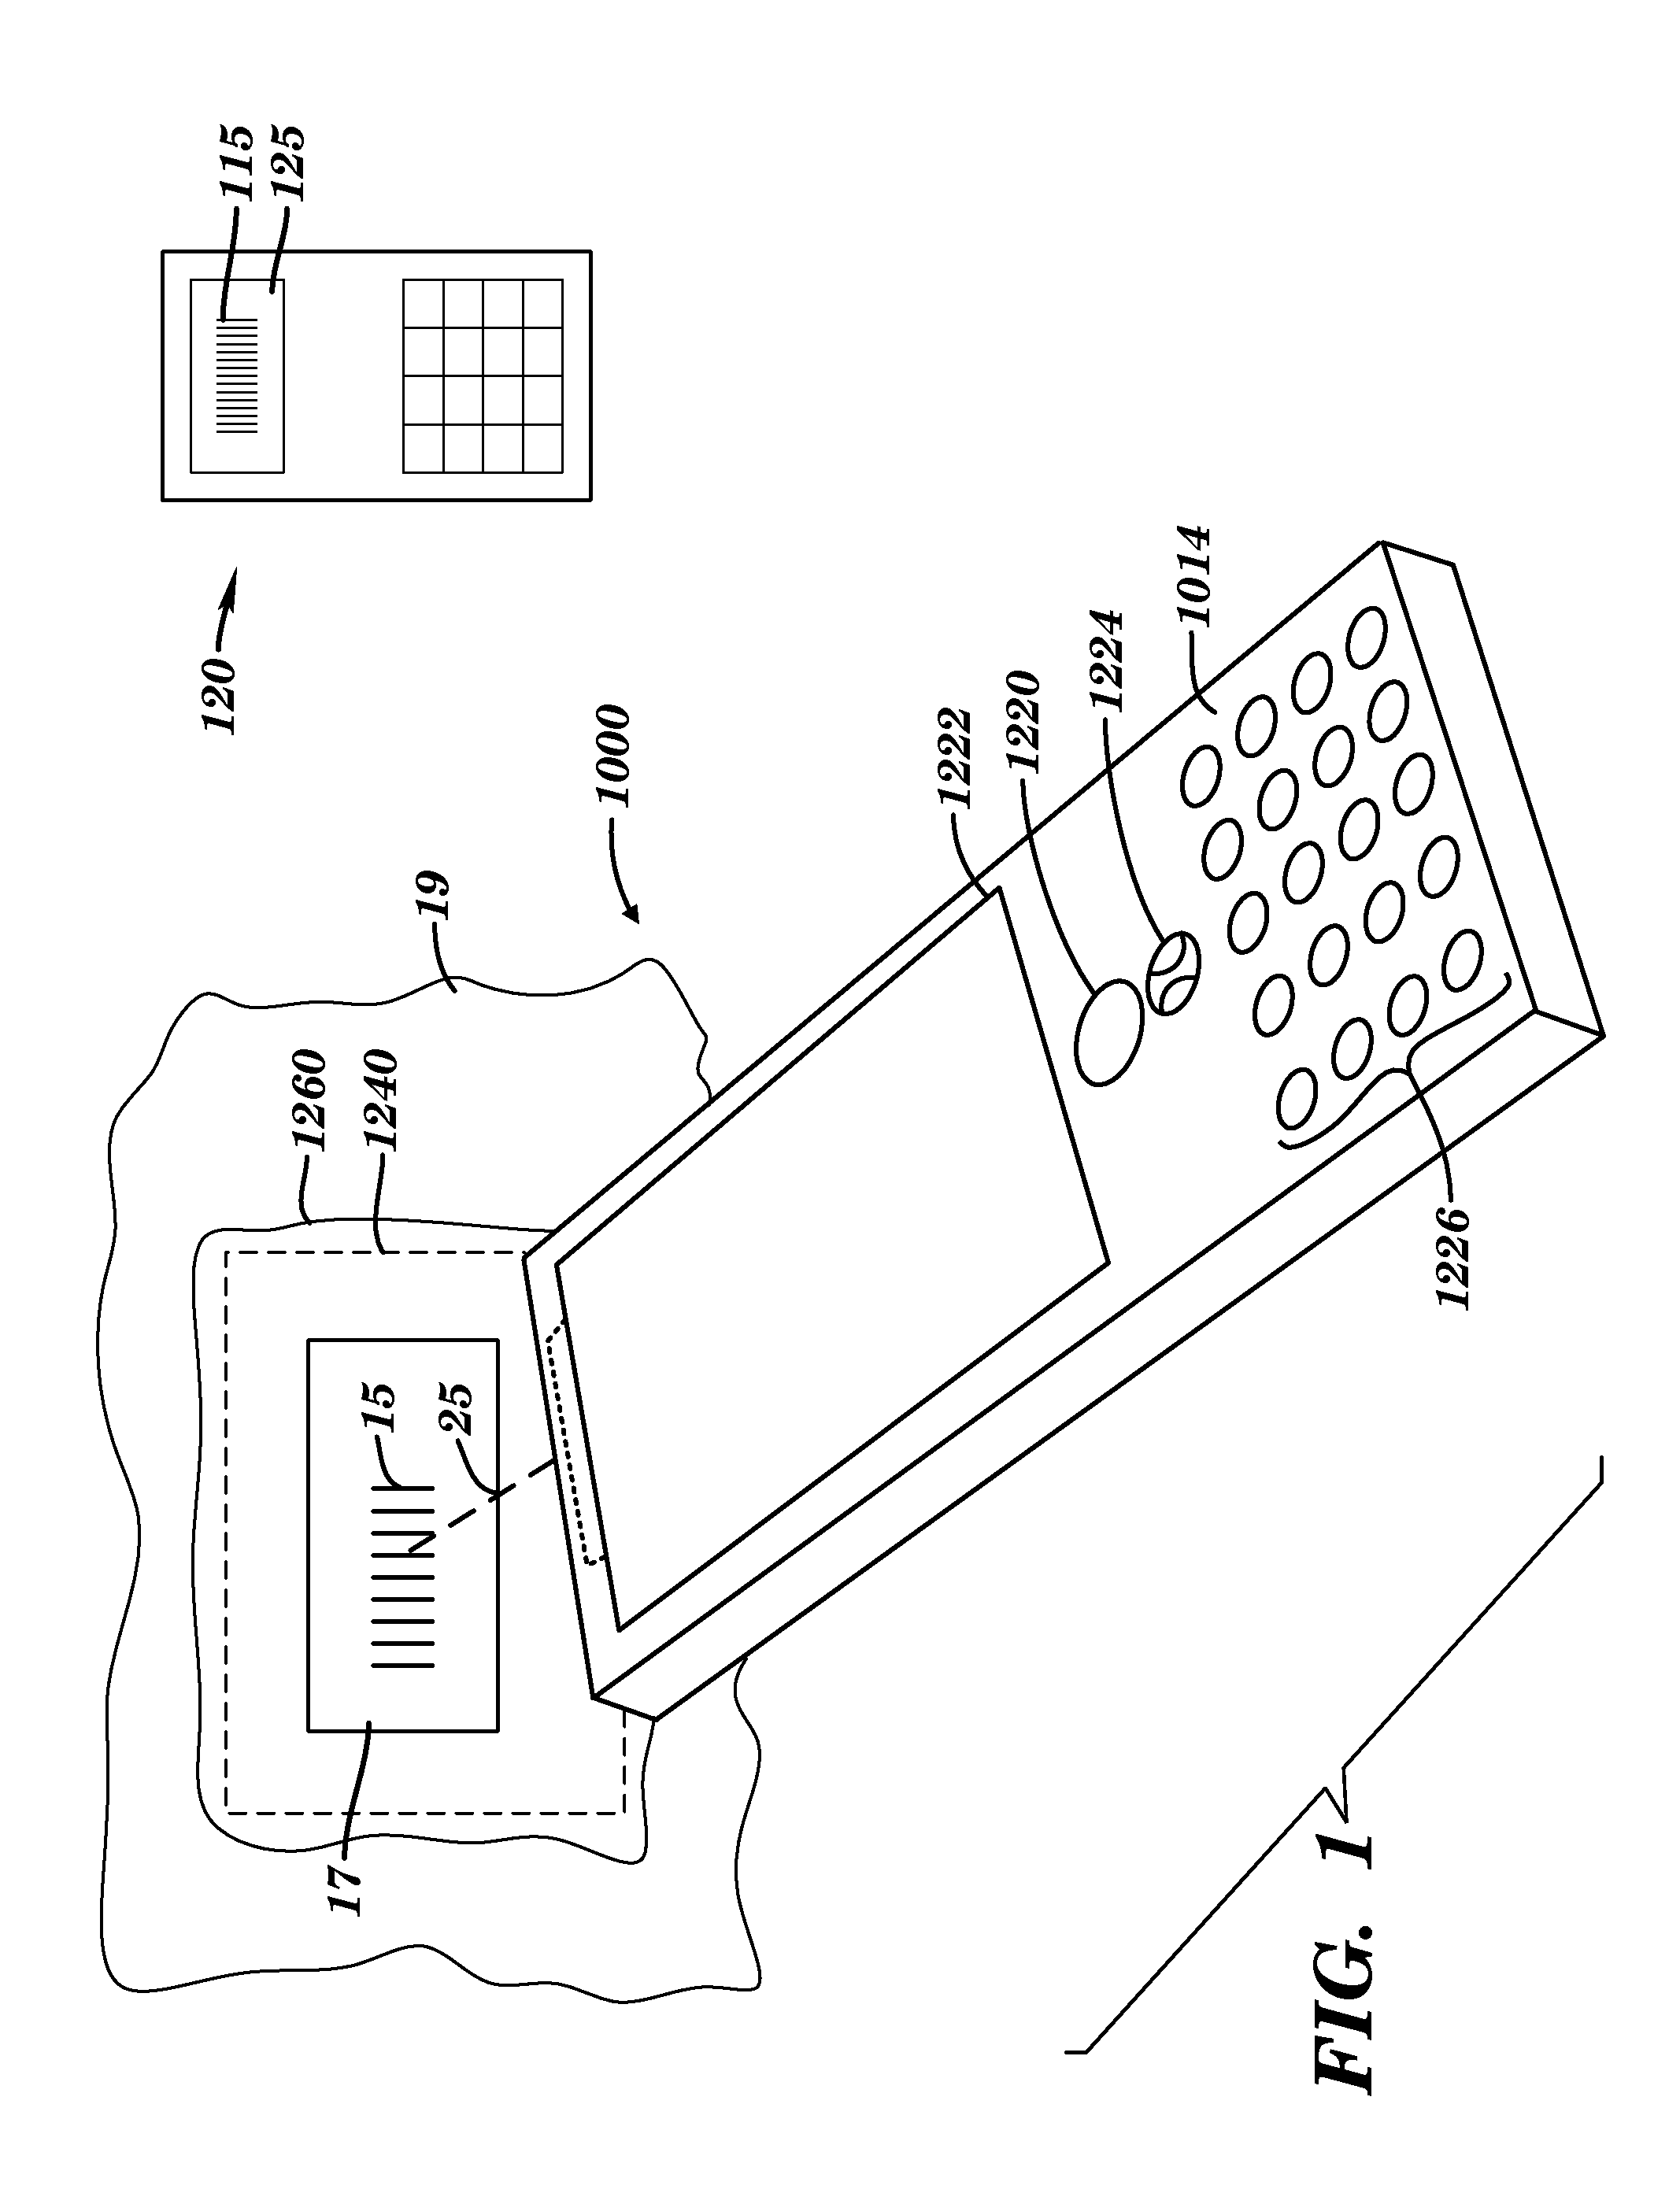 Imaging devices and methods for inhibiting or removing captured aiming pattern